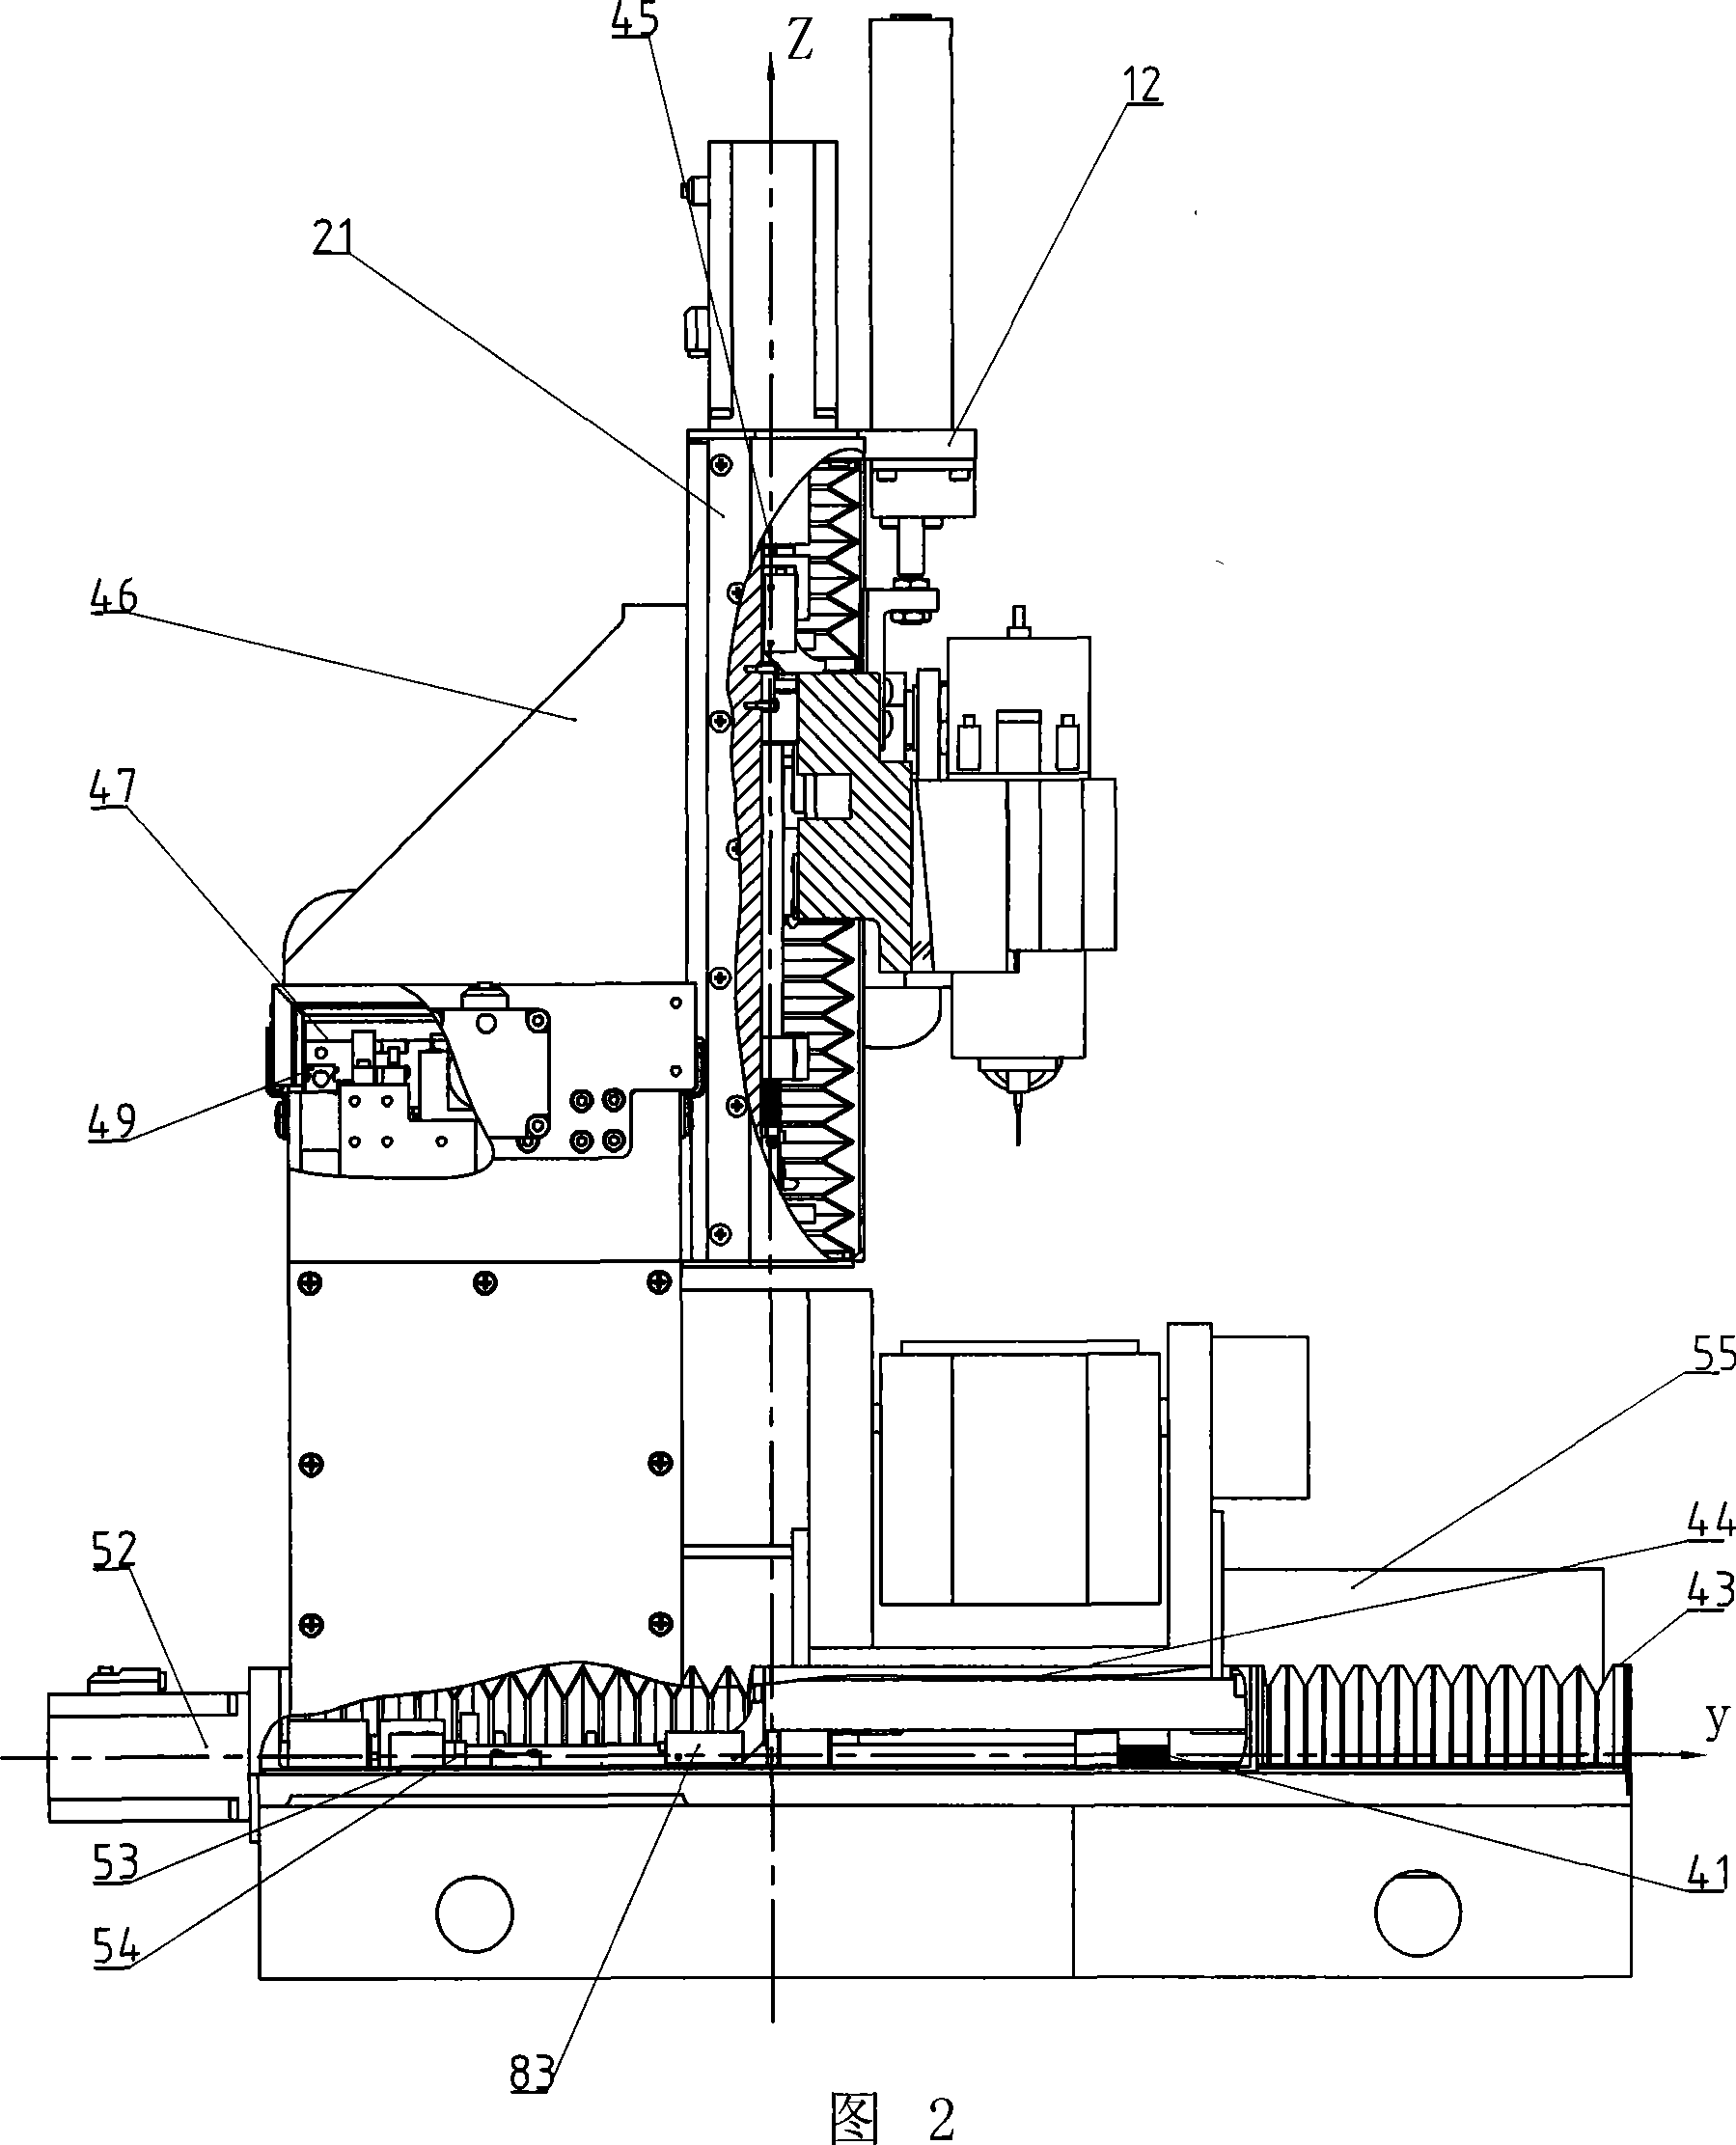 Small-sized five-shaft linkage numerically controlled machine